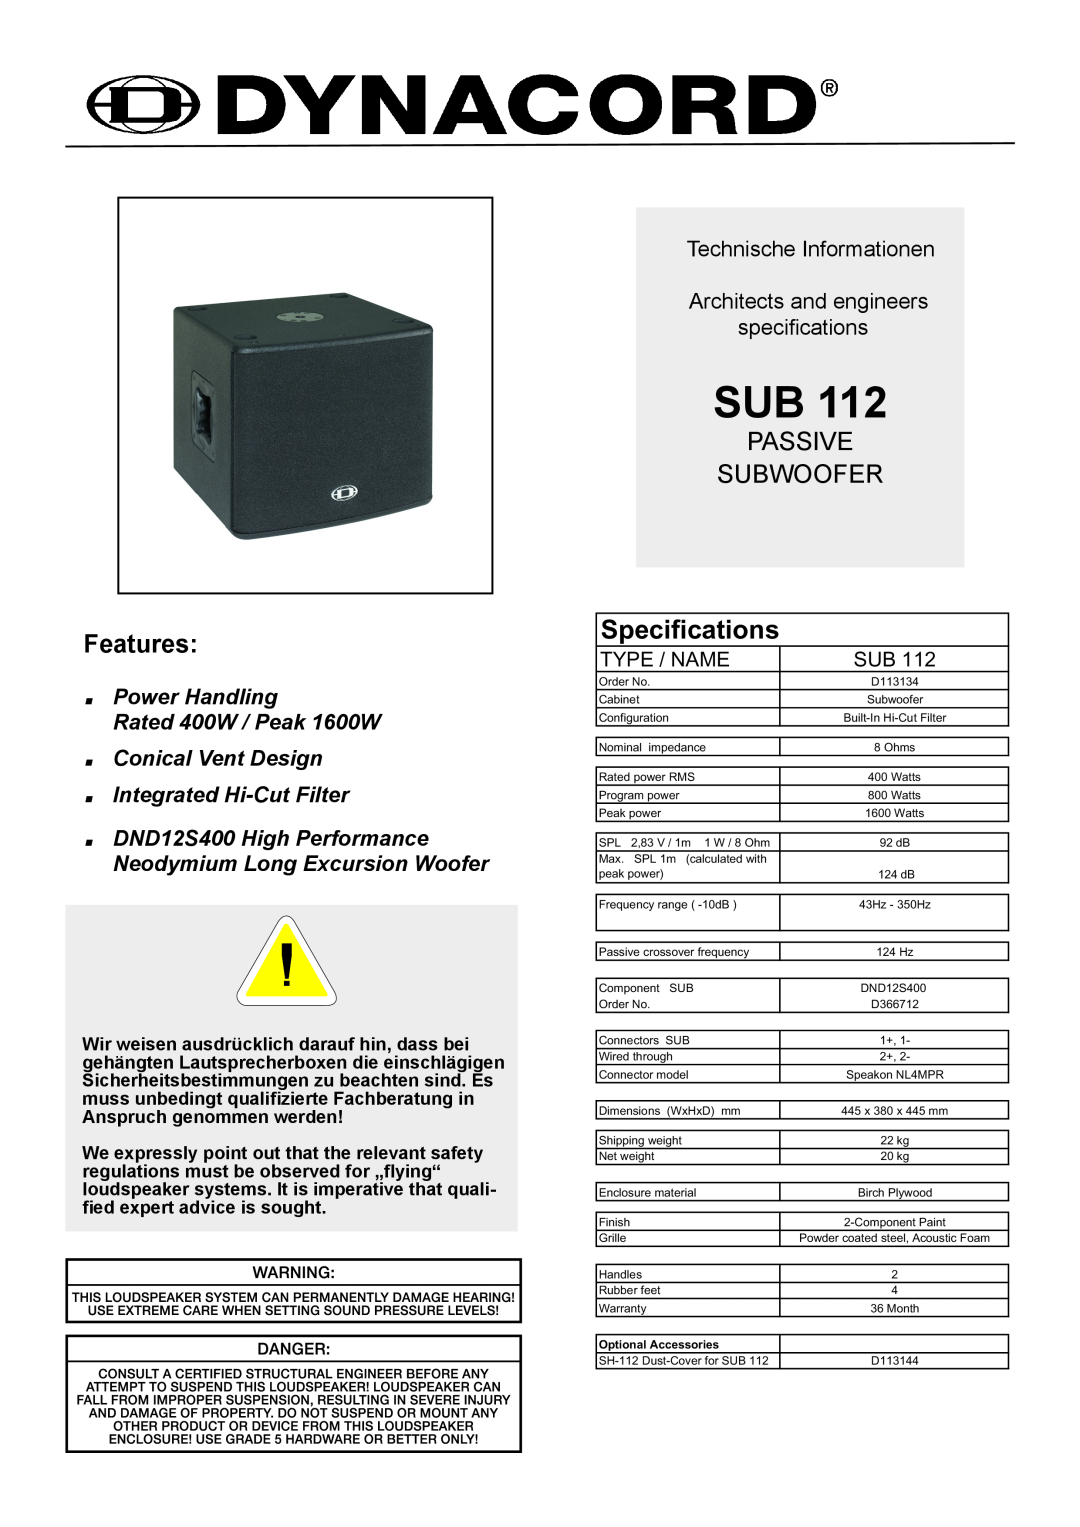 Dynacord SUB 112 specifications Features, Passive Subwoofer, Specifications, Power Handling Rated 400W / Peak 1600W 